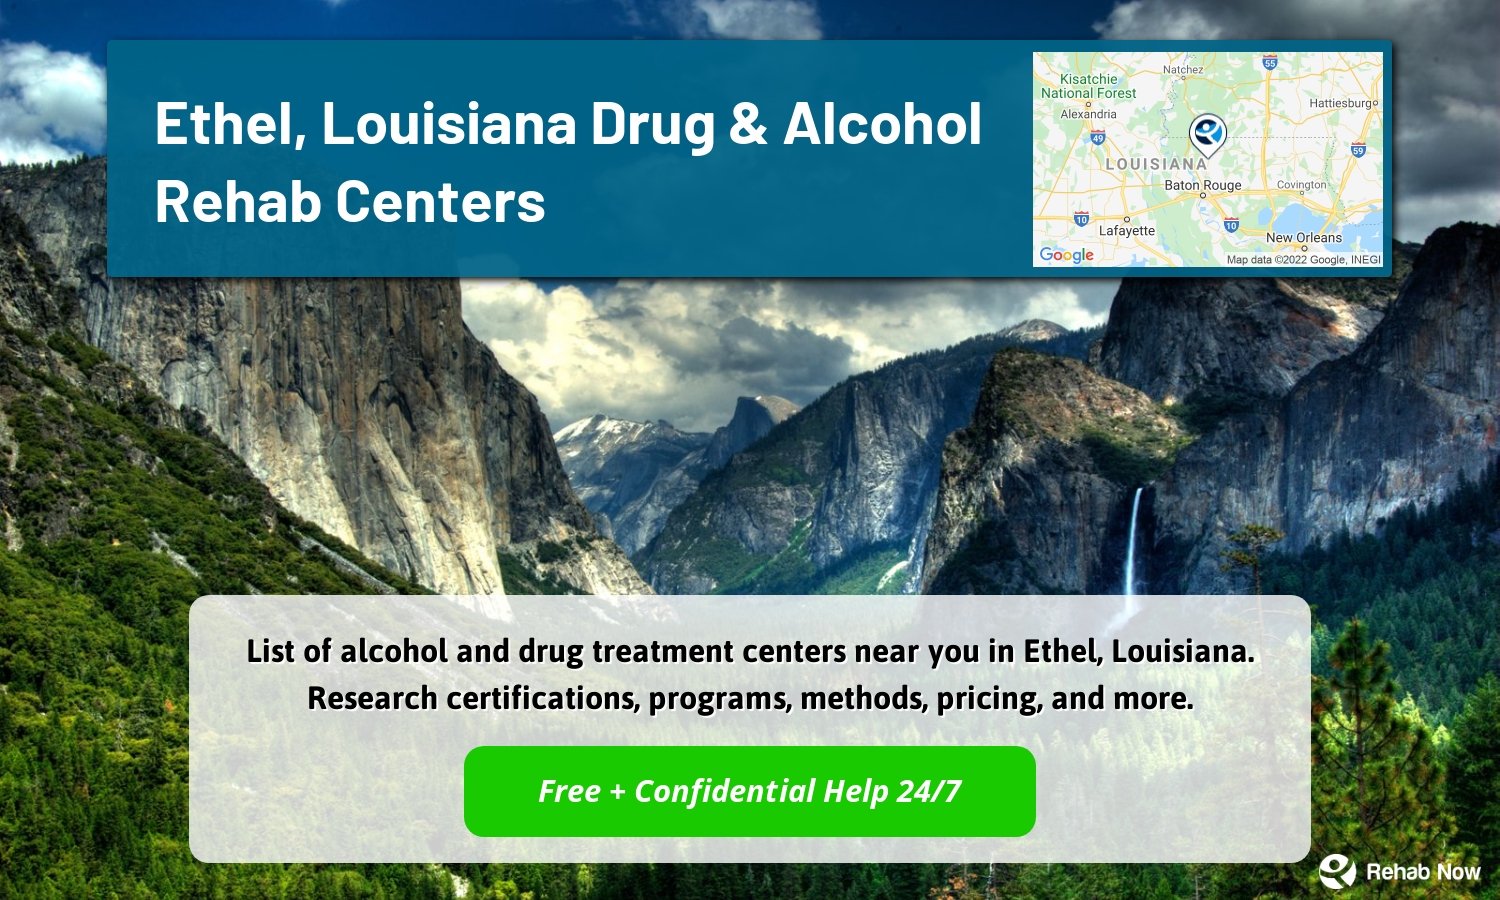 List of alcohol and drug treatment centers near you in Ethel, Louisiana. Research certifications, programs, methods, pricing, and more.